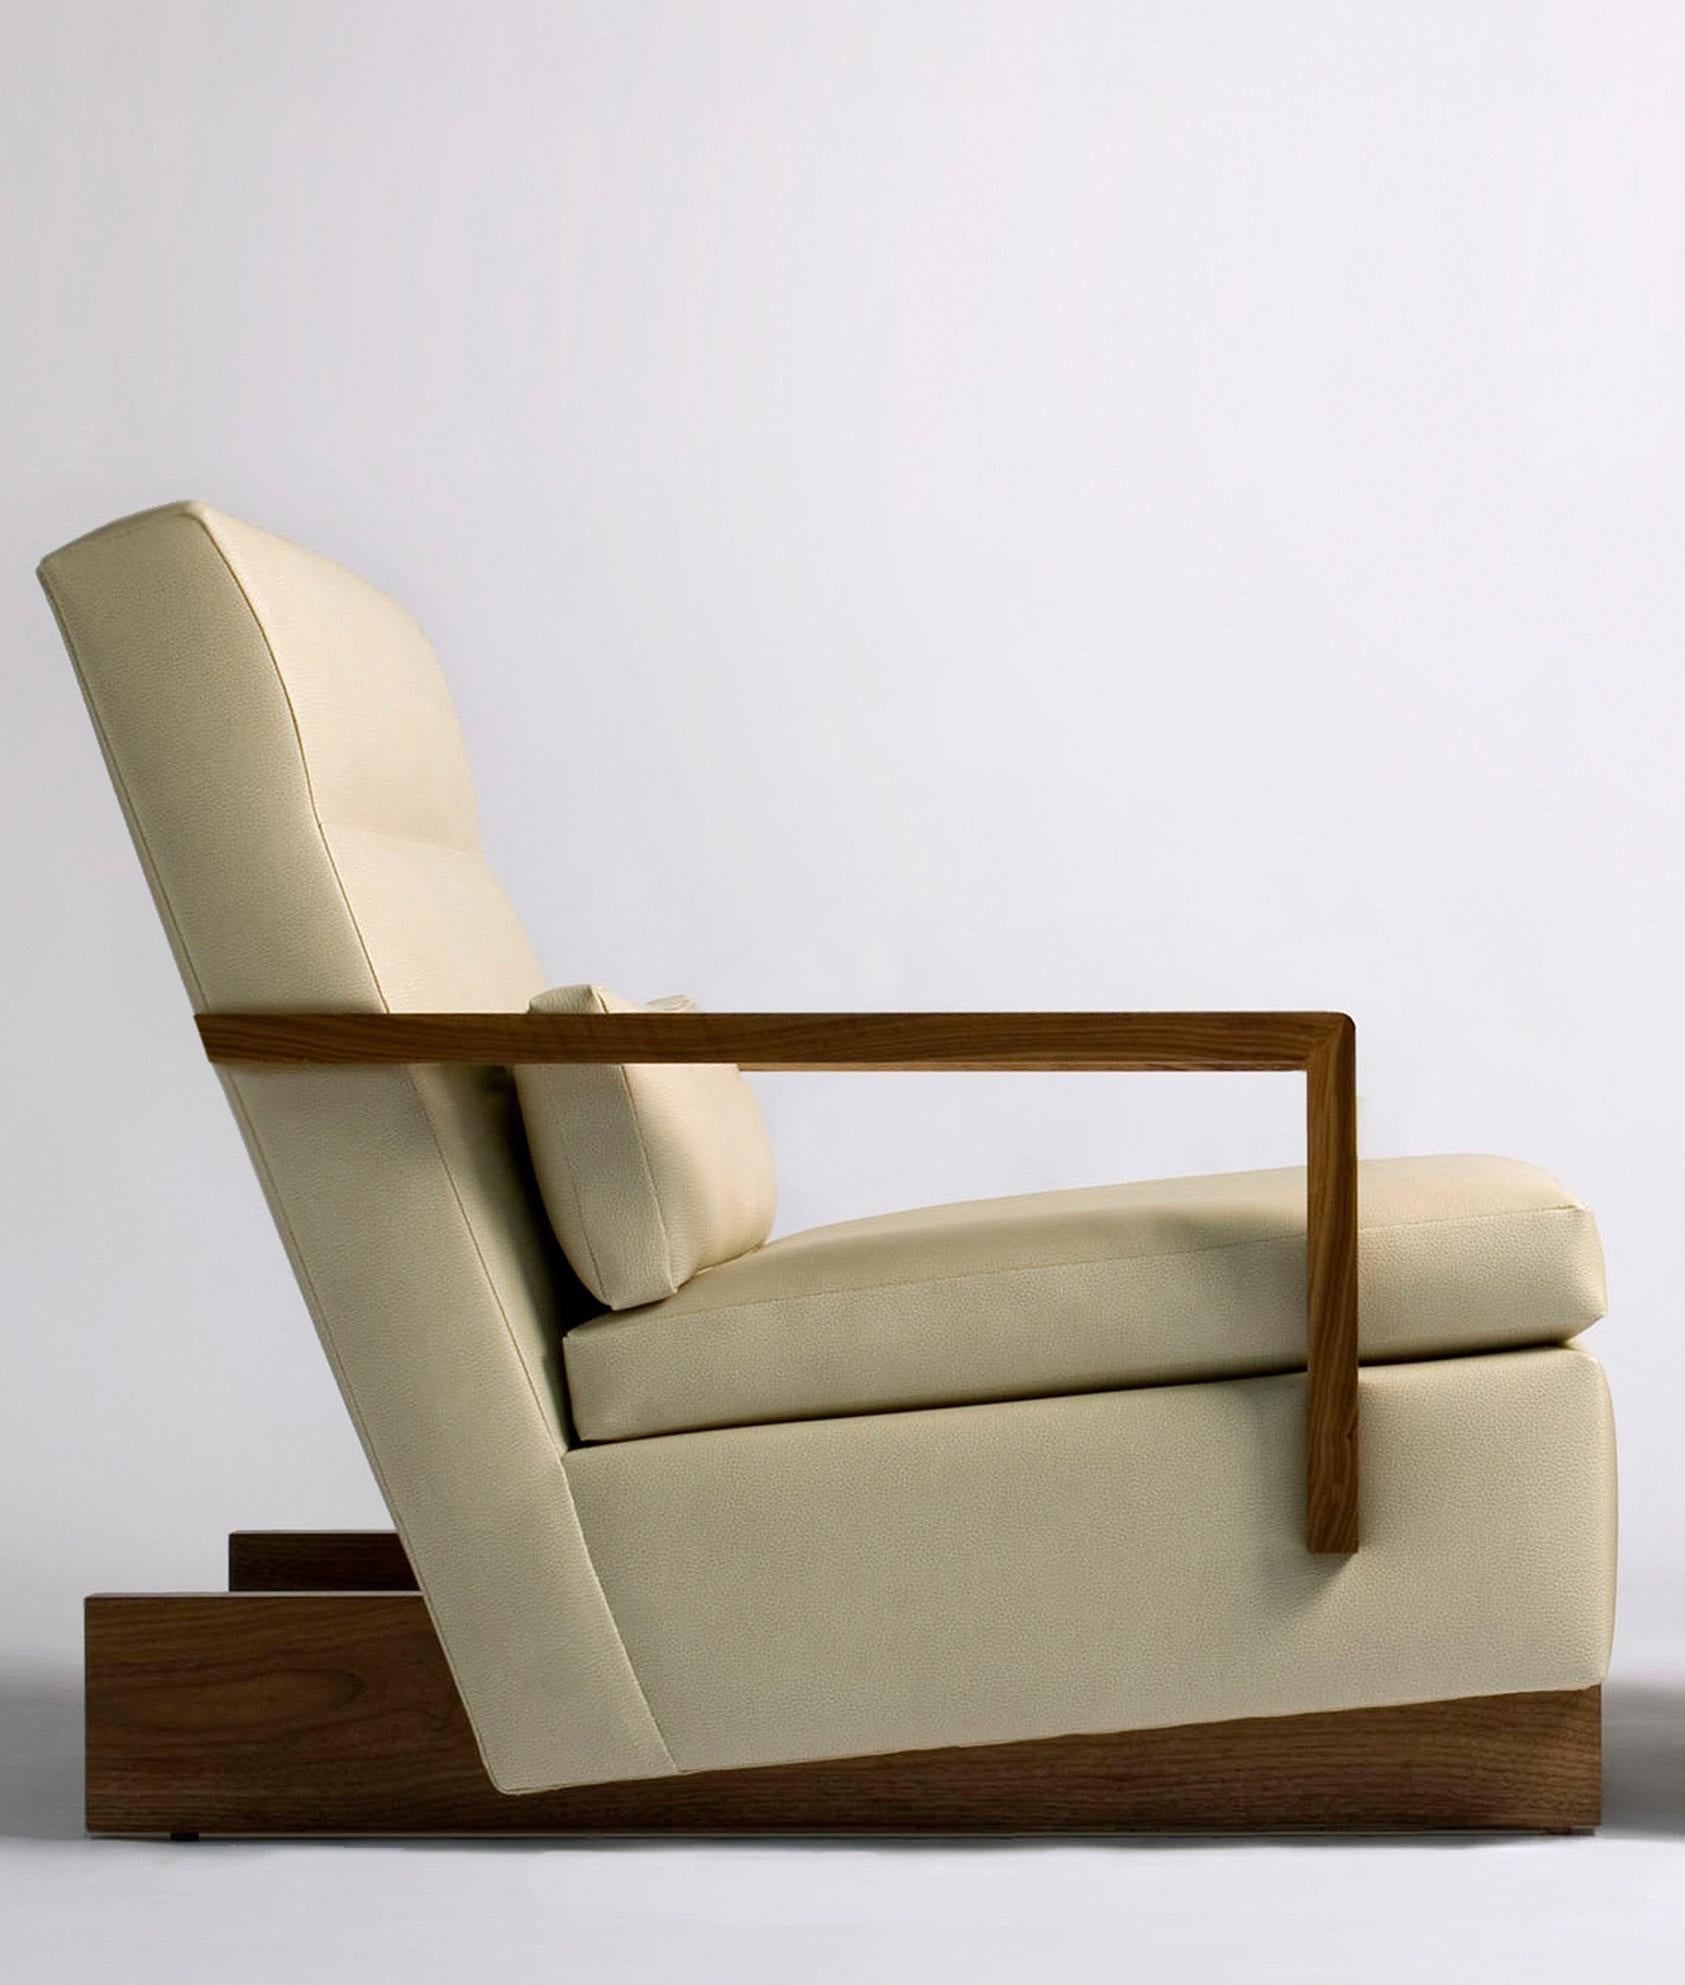 Trax Lounge Chair With Arms by Phase Design
Dimensions: D 97.8 x W 72.4 x H 84.5 cm. 
Materials: Walnut and leather.

Solid wood legs and armrests with upholstered body, available in walnut, white oak, or ebonized oak. Available with or without